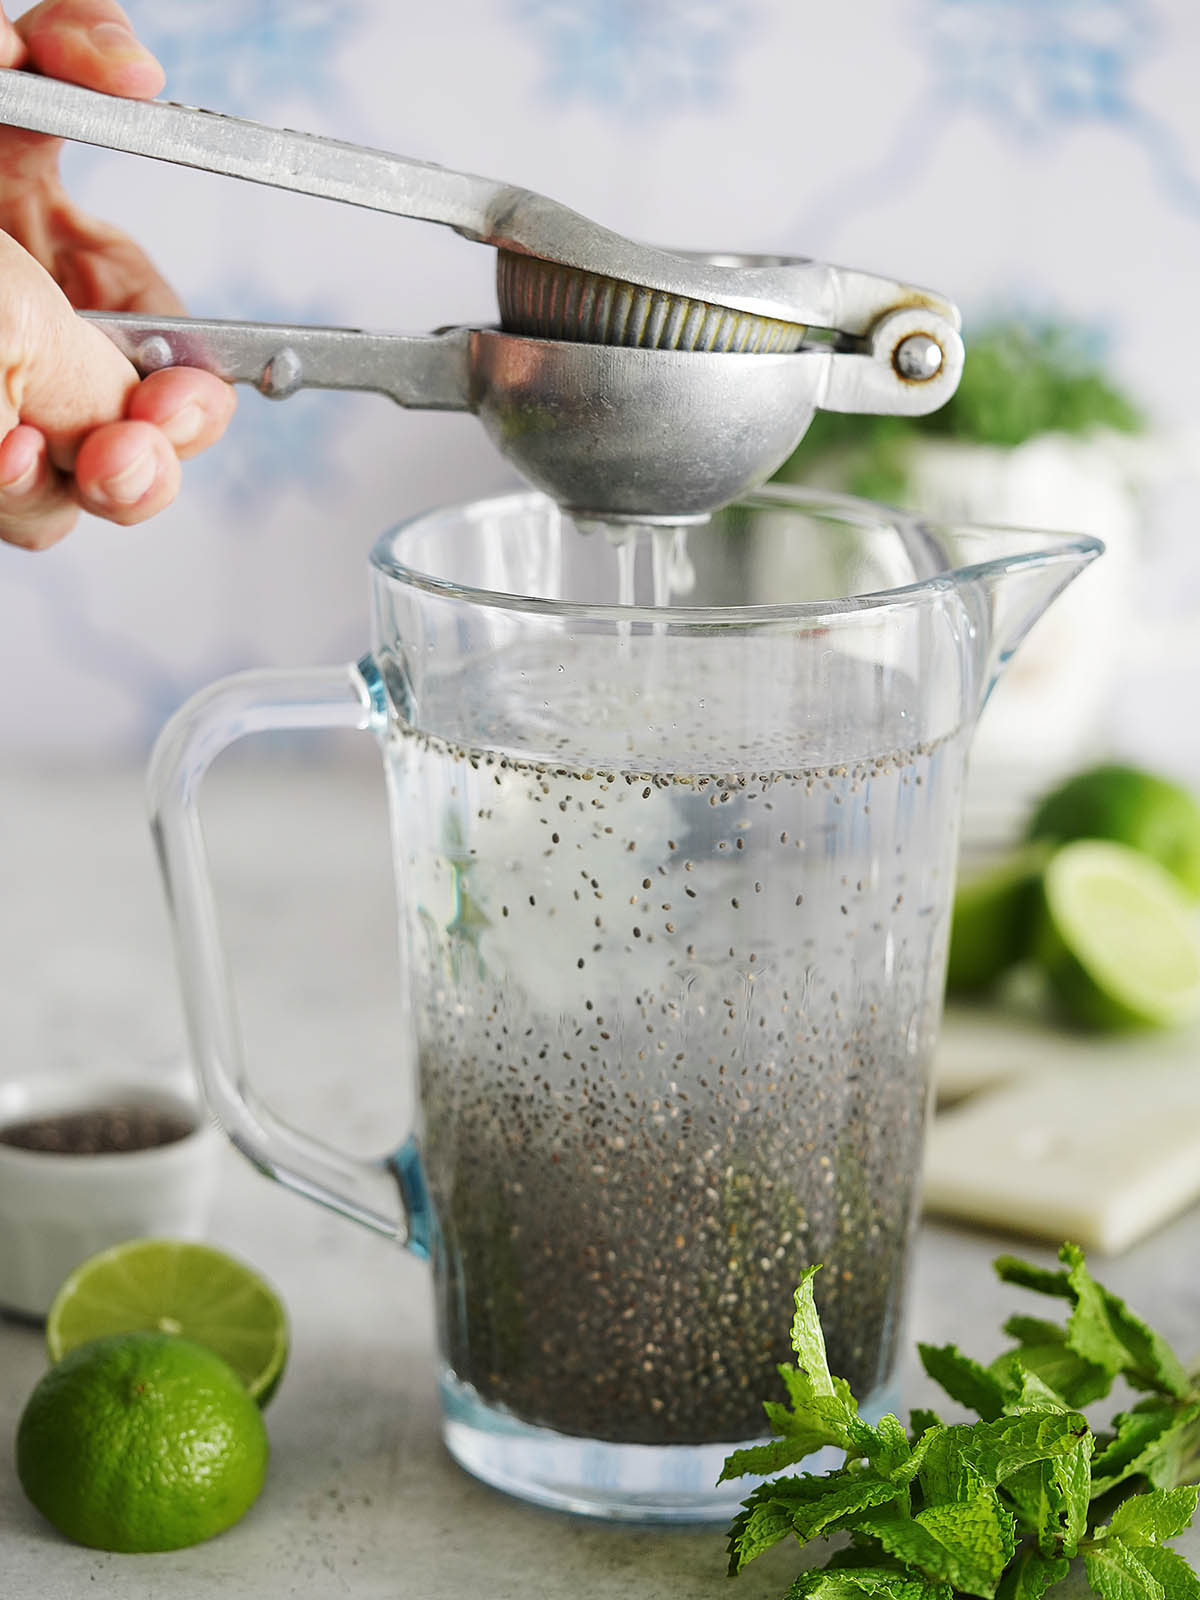 Squeezing lime into a jar with water and chia seeds.